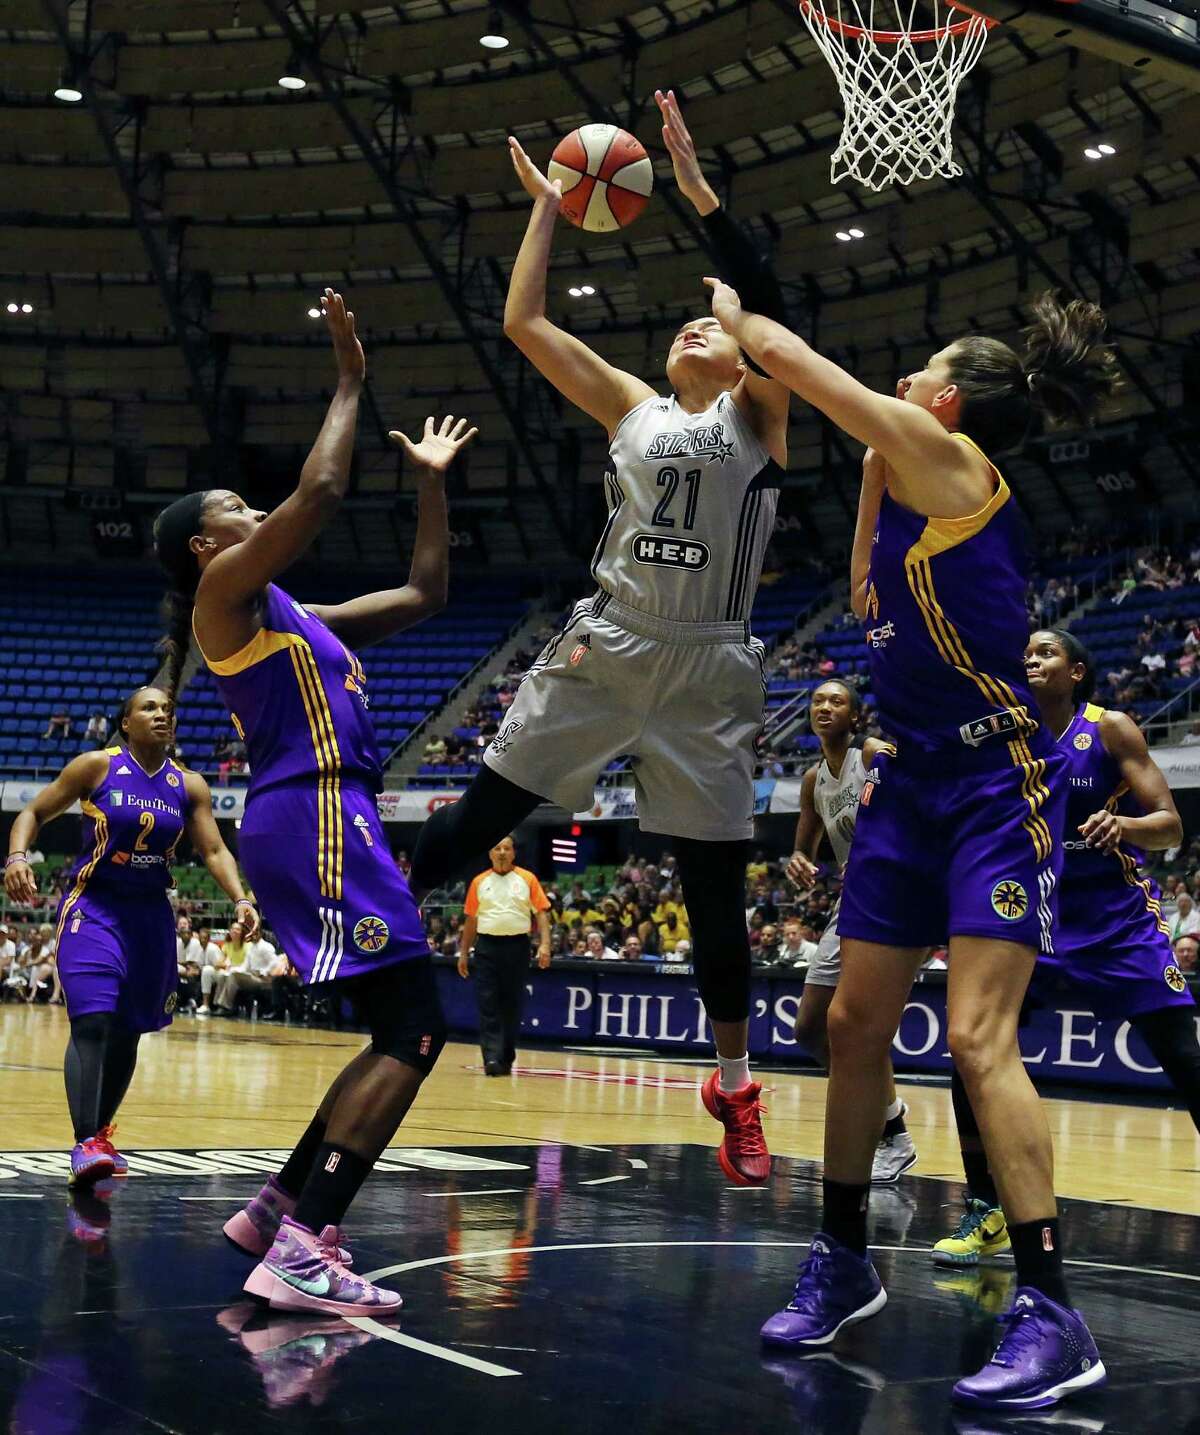 San Antonio Stars’ Kayla McBride grabs for a rebound between Los Angeles Sparks’ Jantel Lavender (left) and Marianna Tolo during first half action Sunday Aug. 2, 2015 at the Freeman Coliseum.